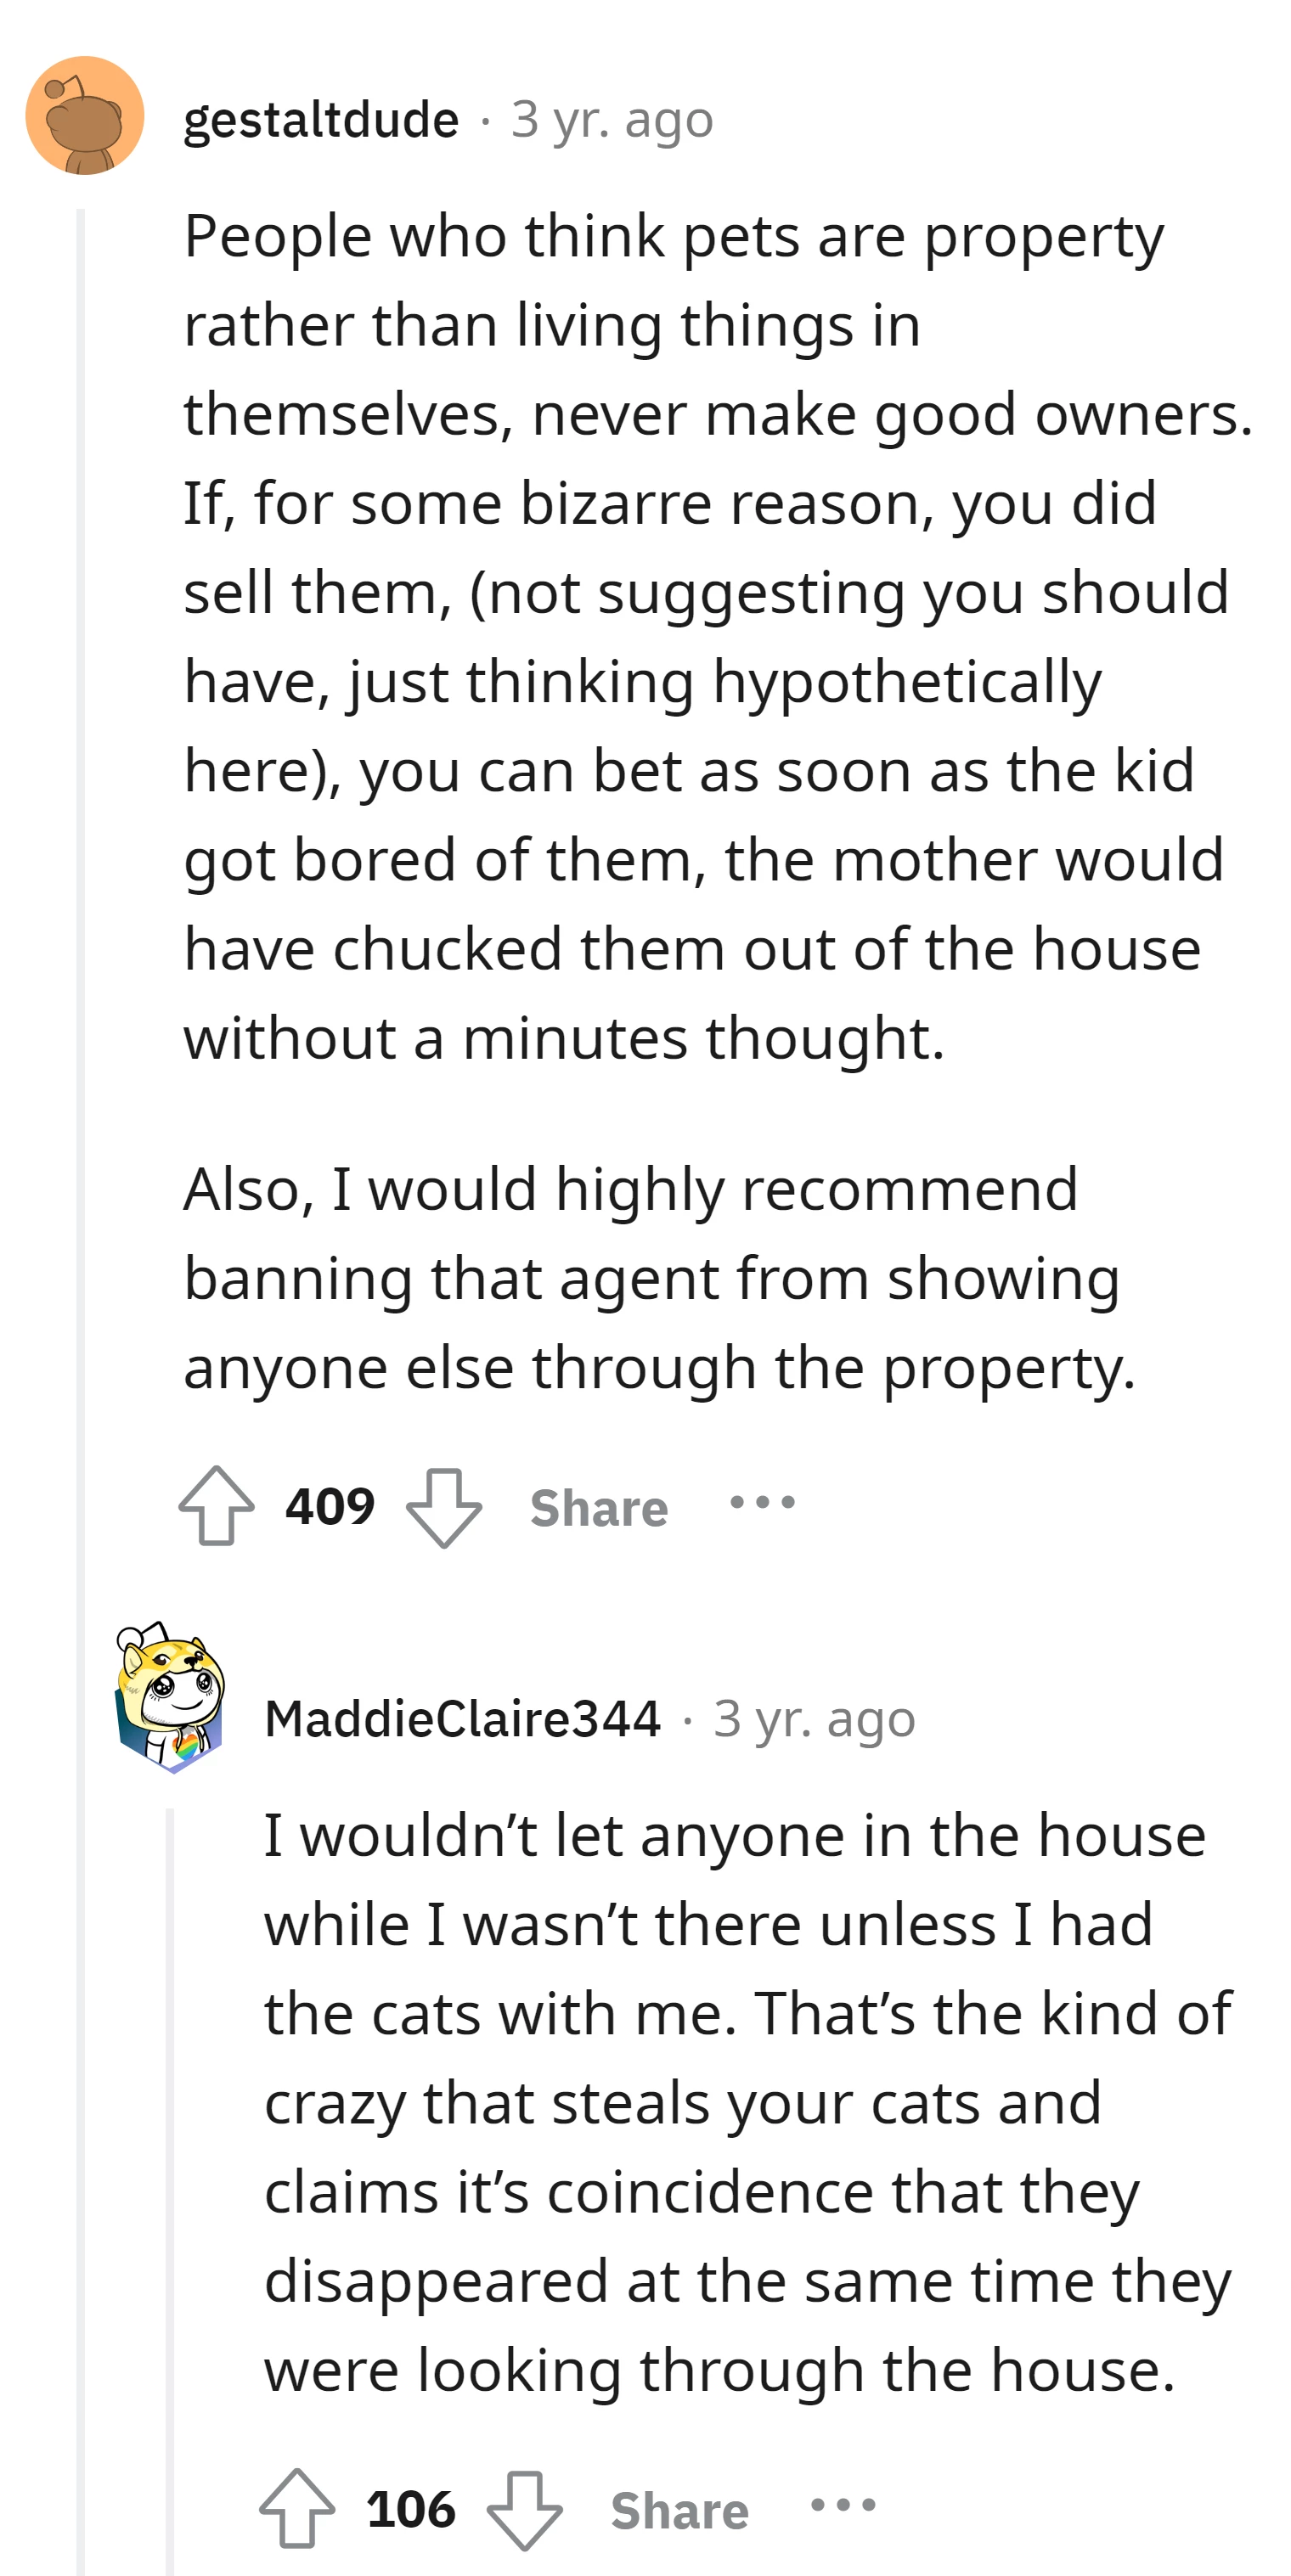 Ban the agent from showing the property to others